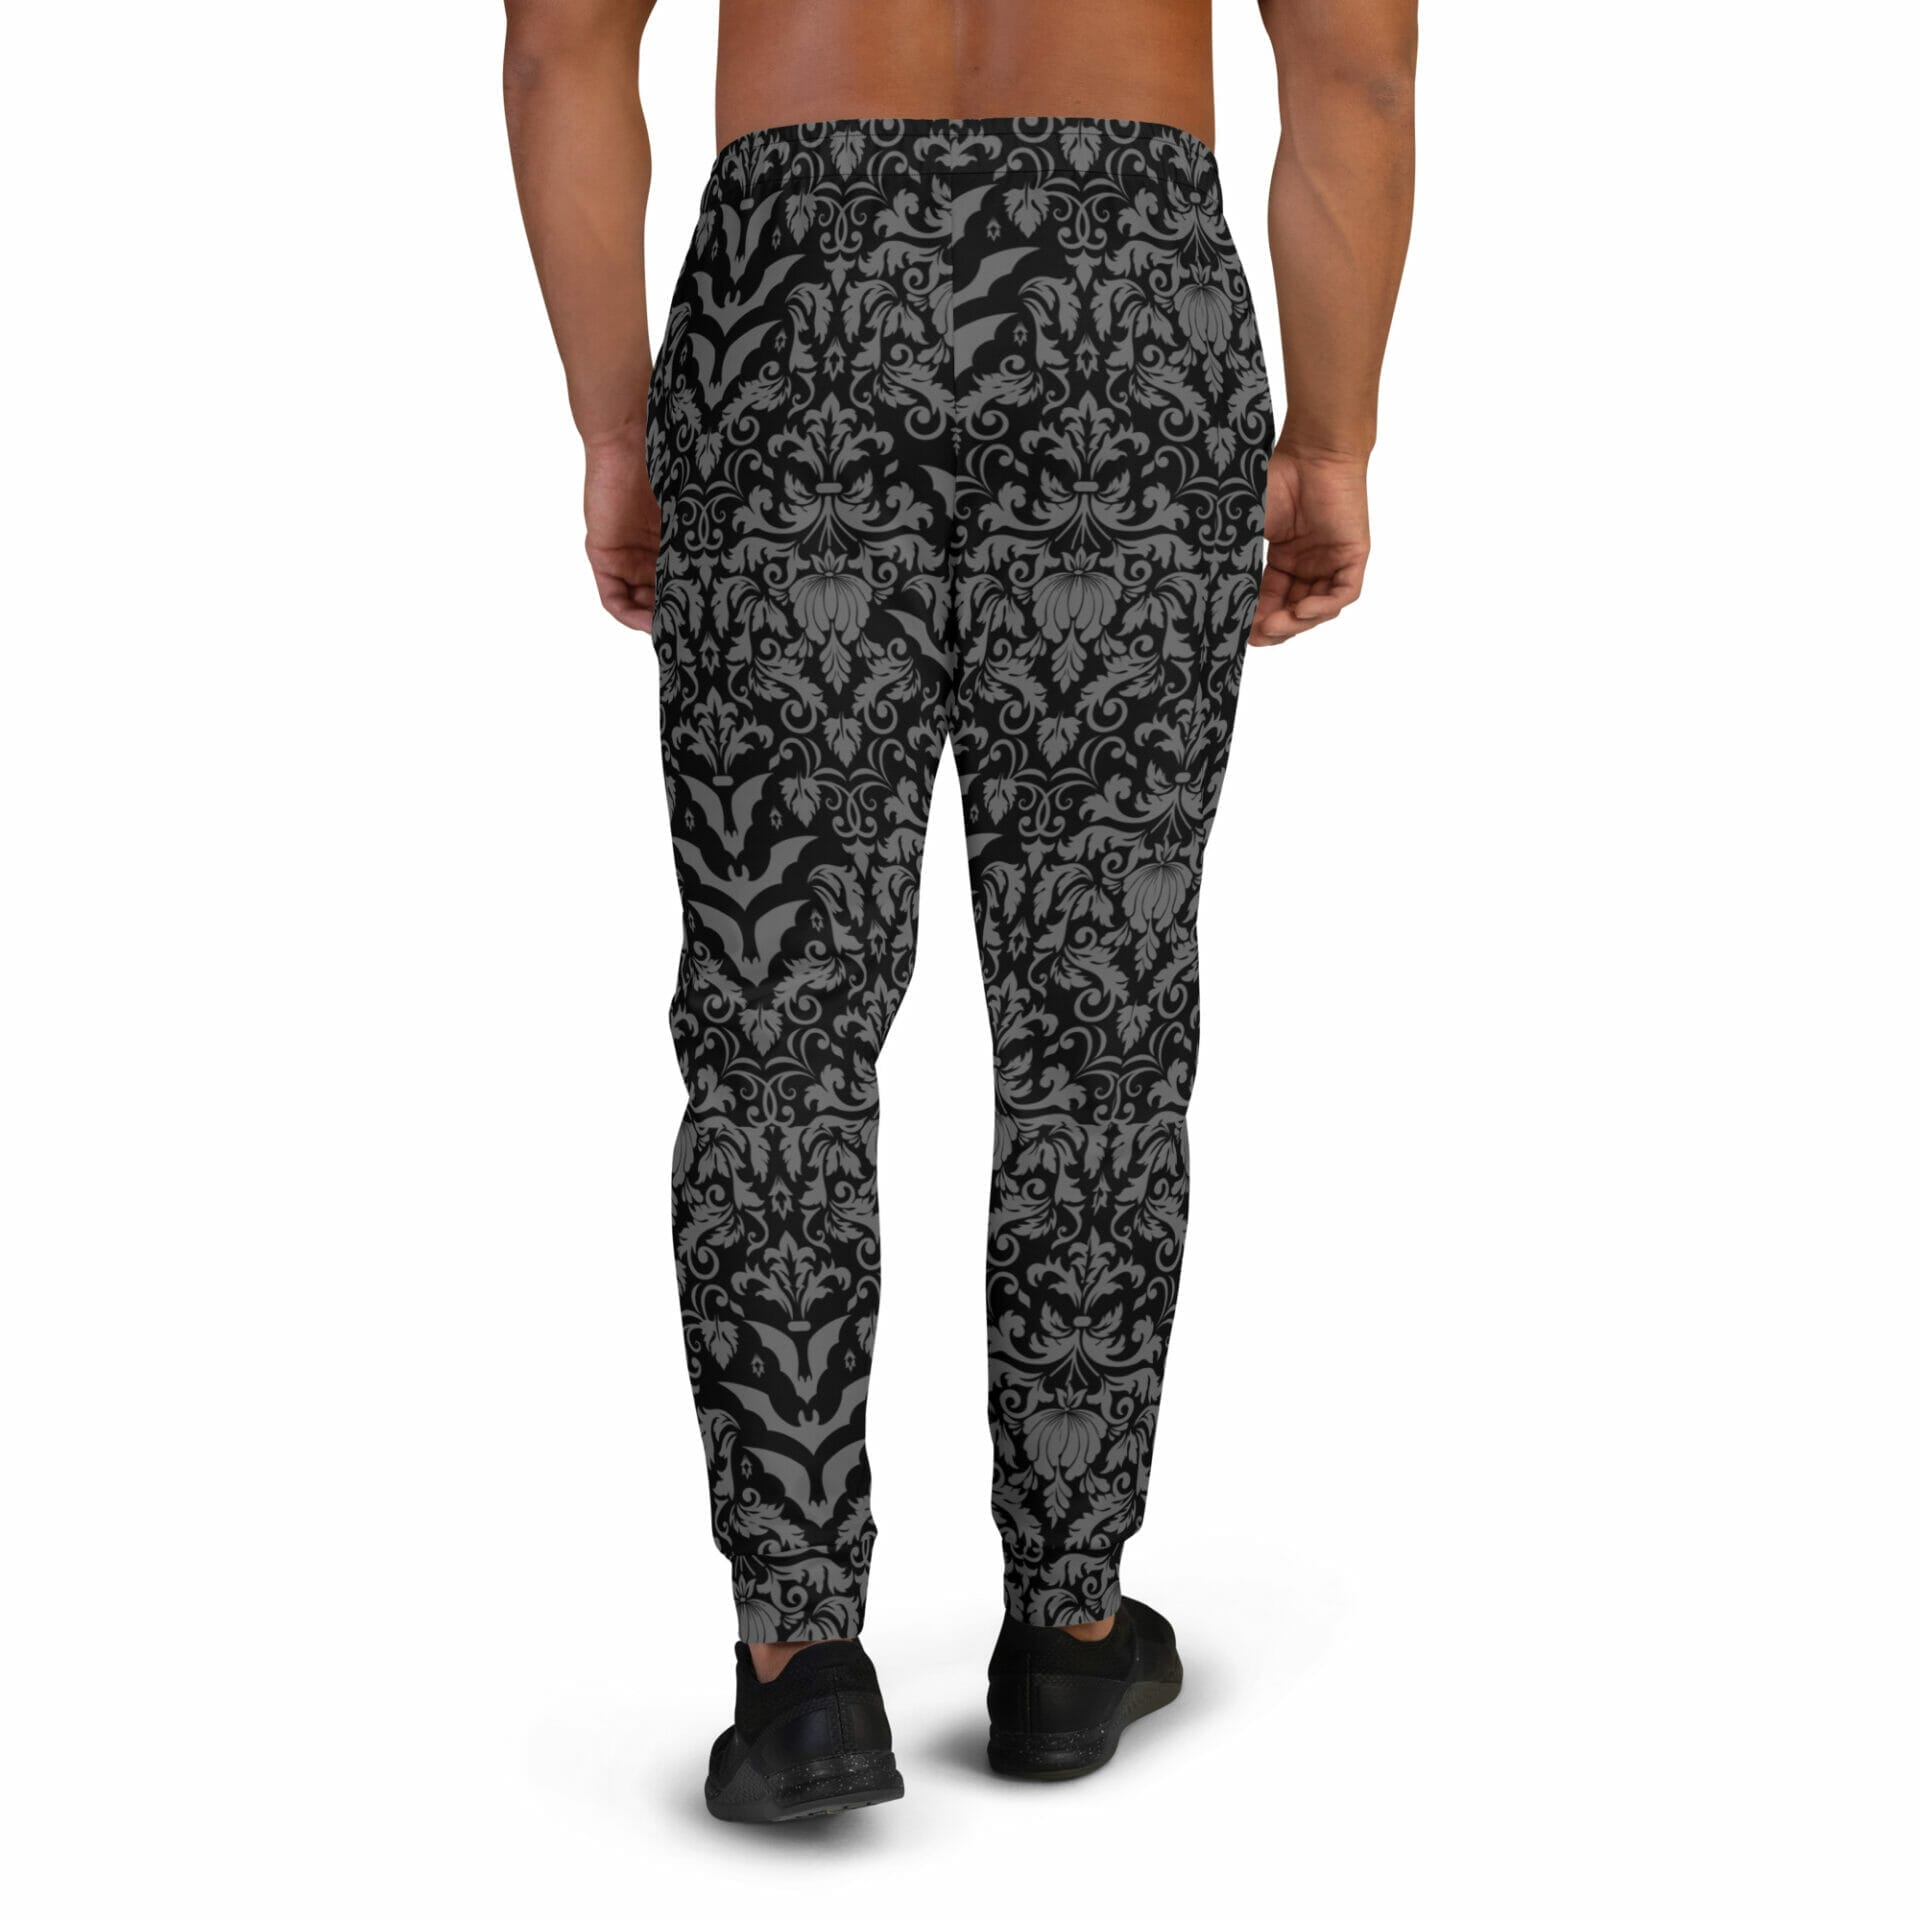 all-over-print-mens-joggers-white-back-6498a9bc1cf34.jpg